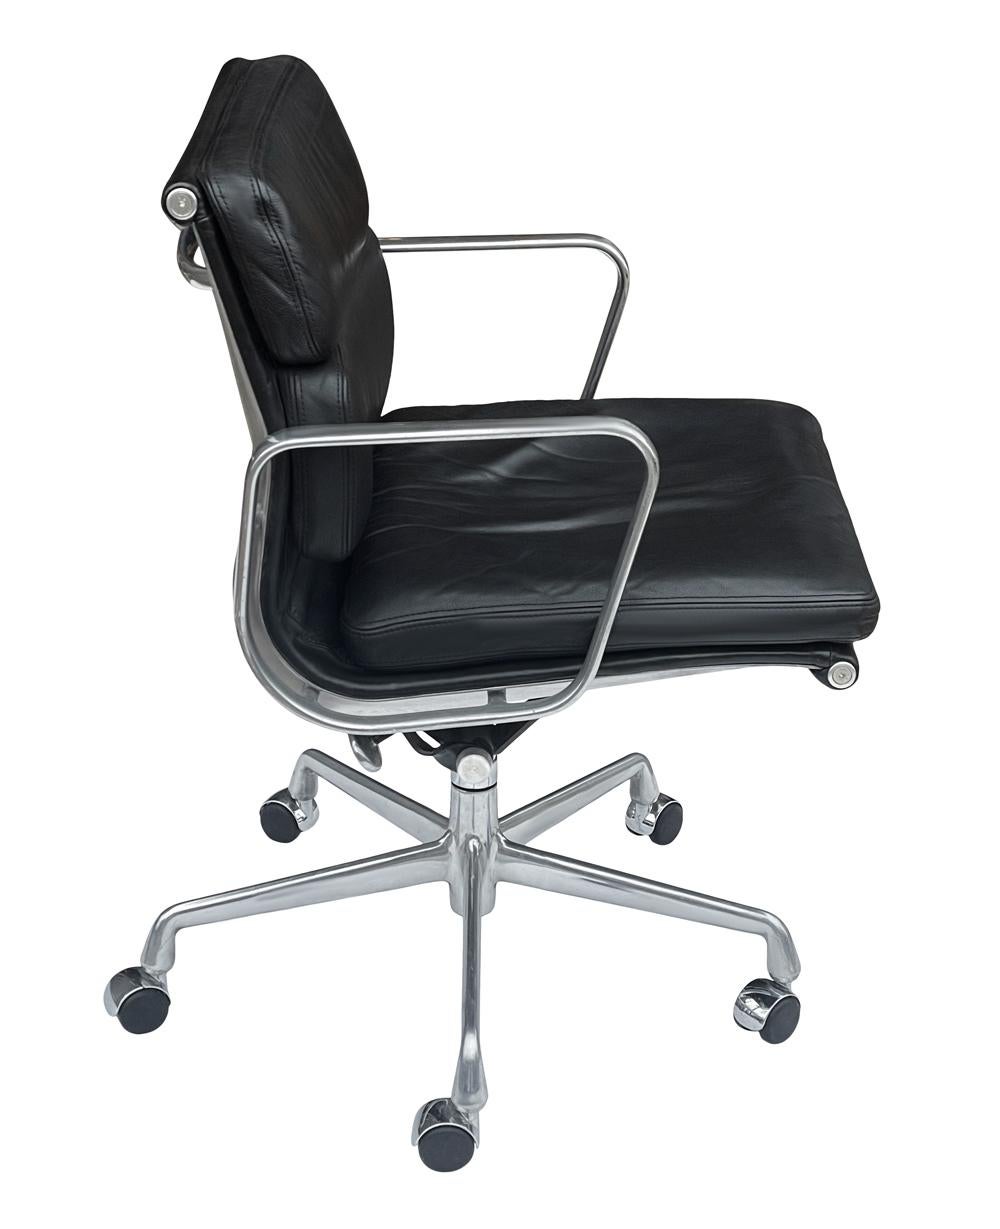 A vintage aluminum group task / office soft pad chair designed by Charles Eames and manufactured by Herman Miller. The chair features aluminum framing with black leather soft pads. Manufacturers label.